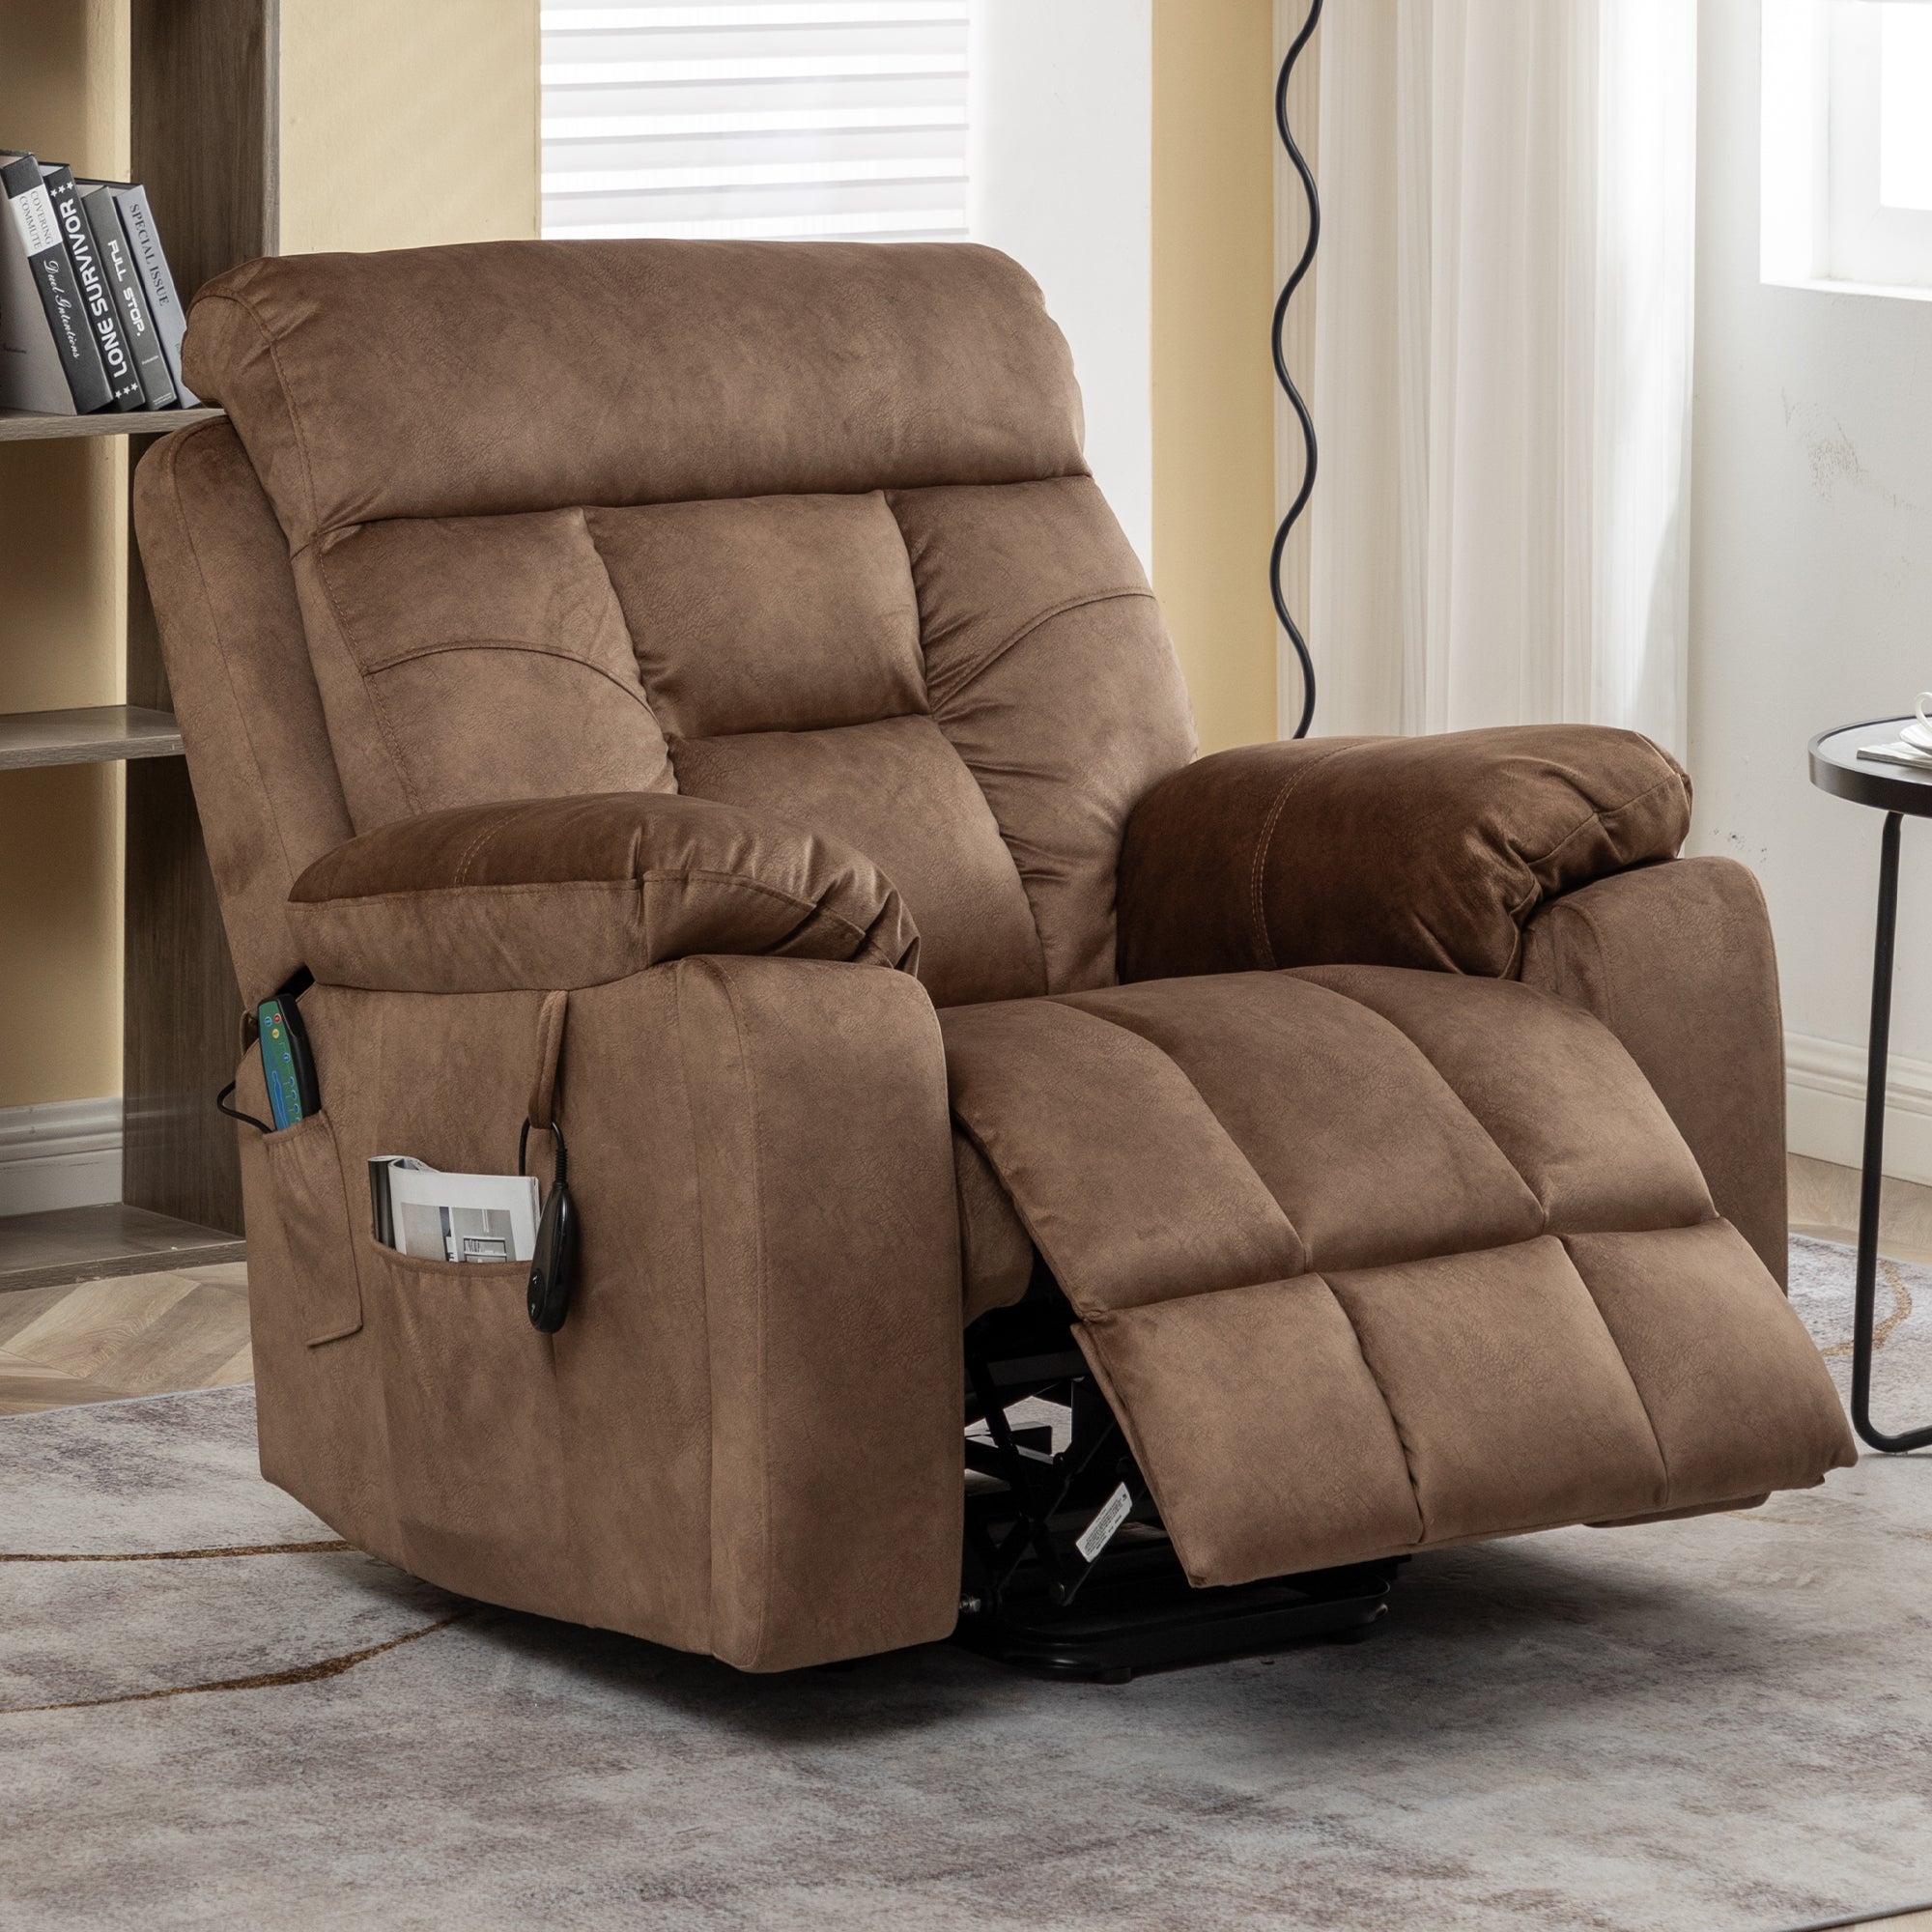 uhomepro Large Electric Massage Recliner with Heat, Fabric Lift